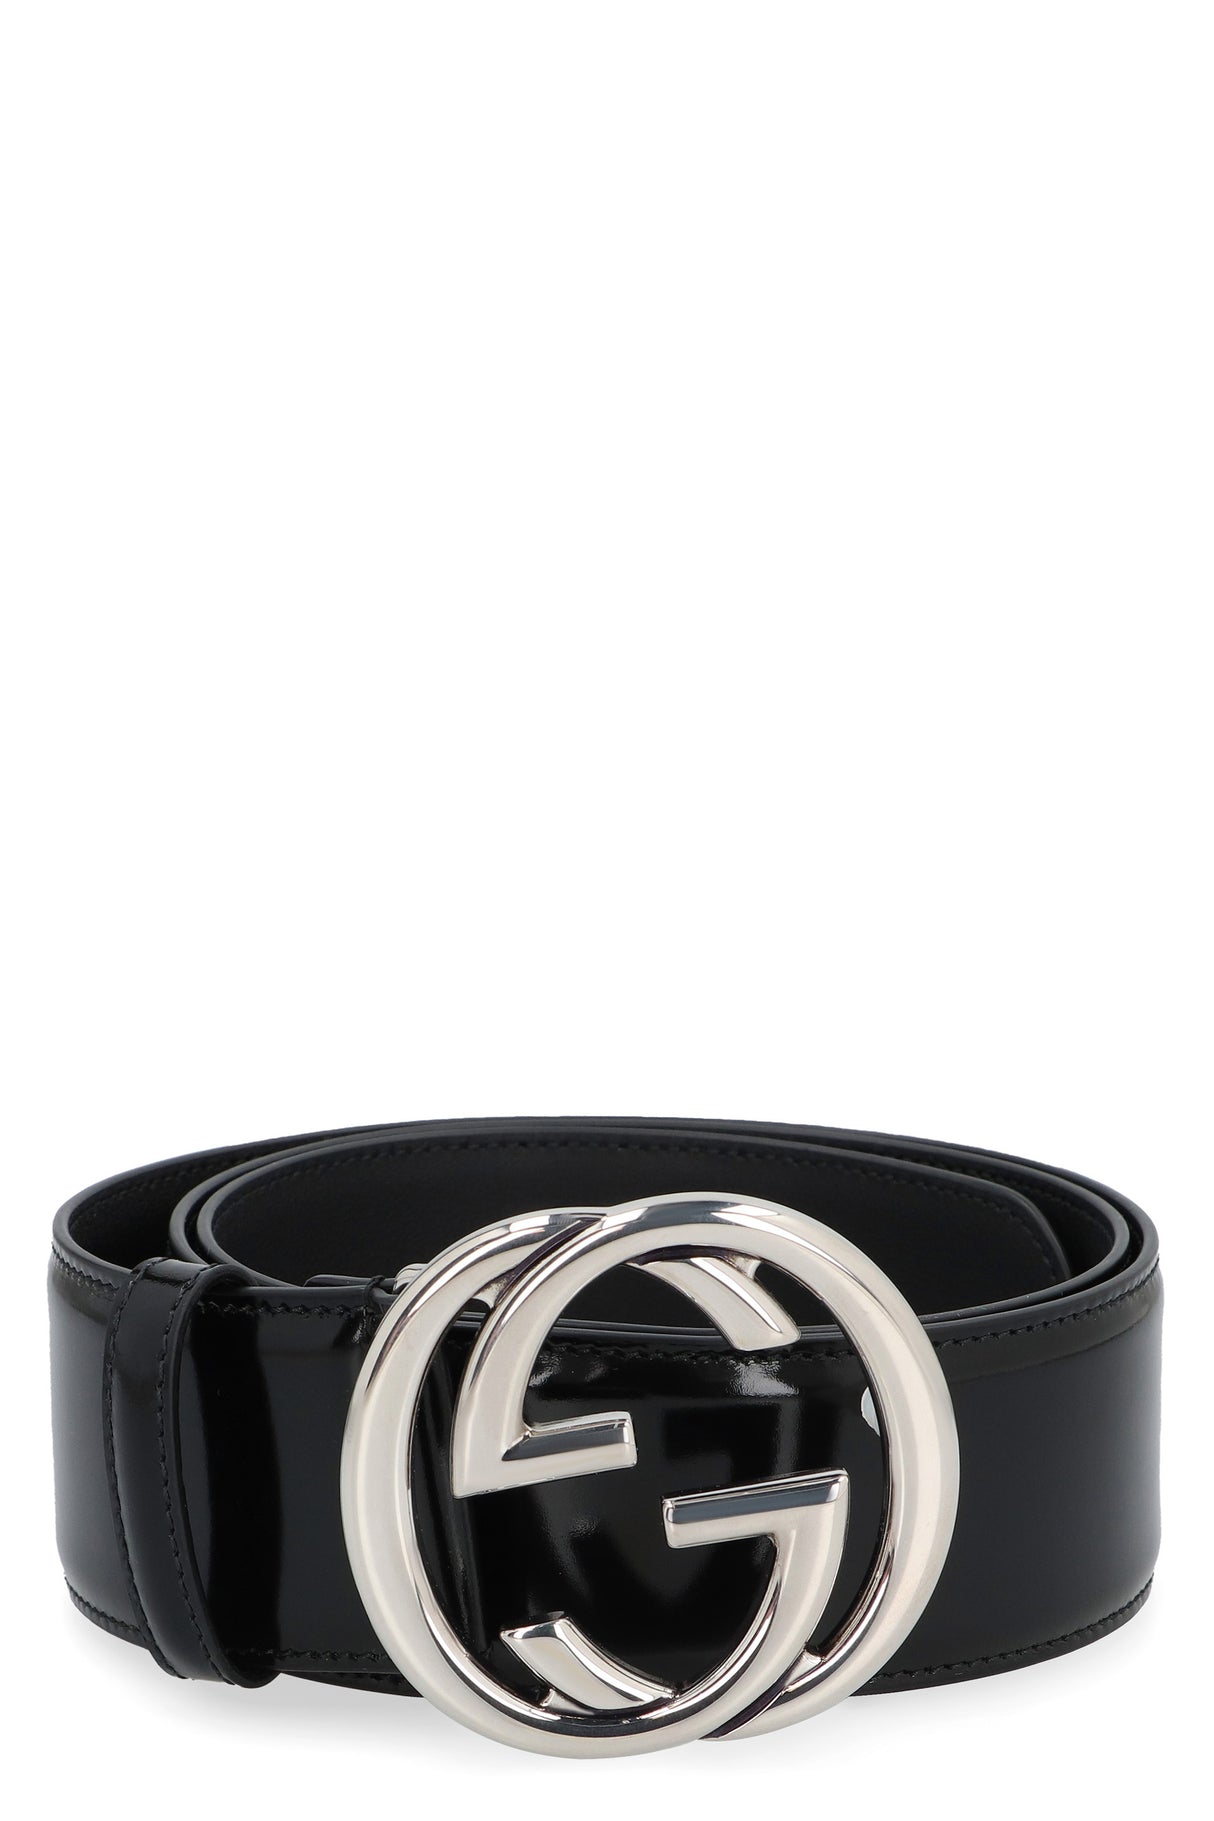 SLEEK PATENT LEATHER BUCKLE BELT FOR THE STYLISH MODERN WOMAN